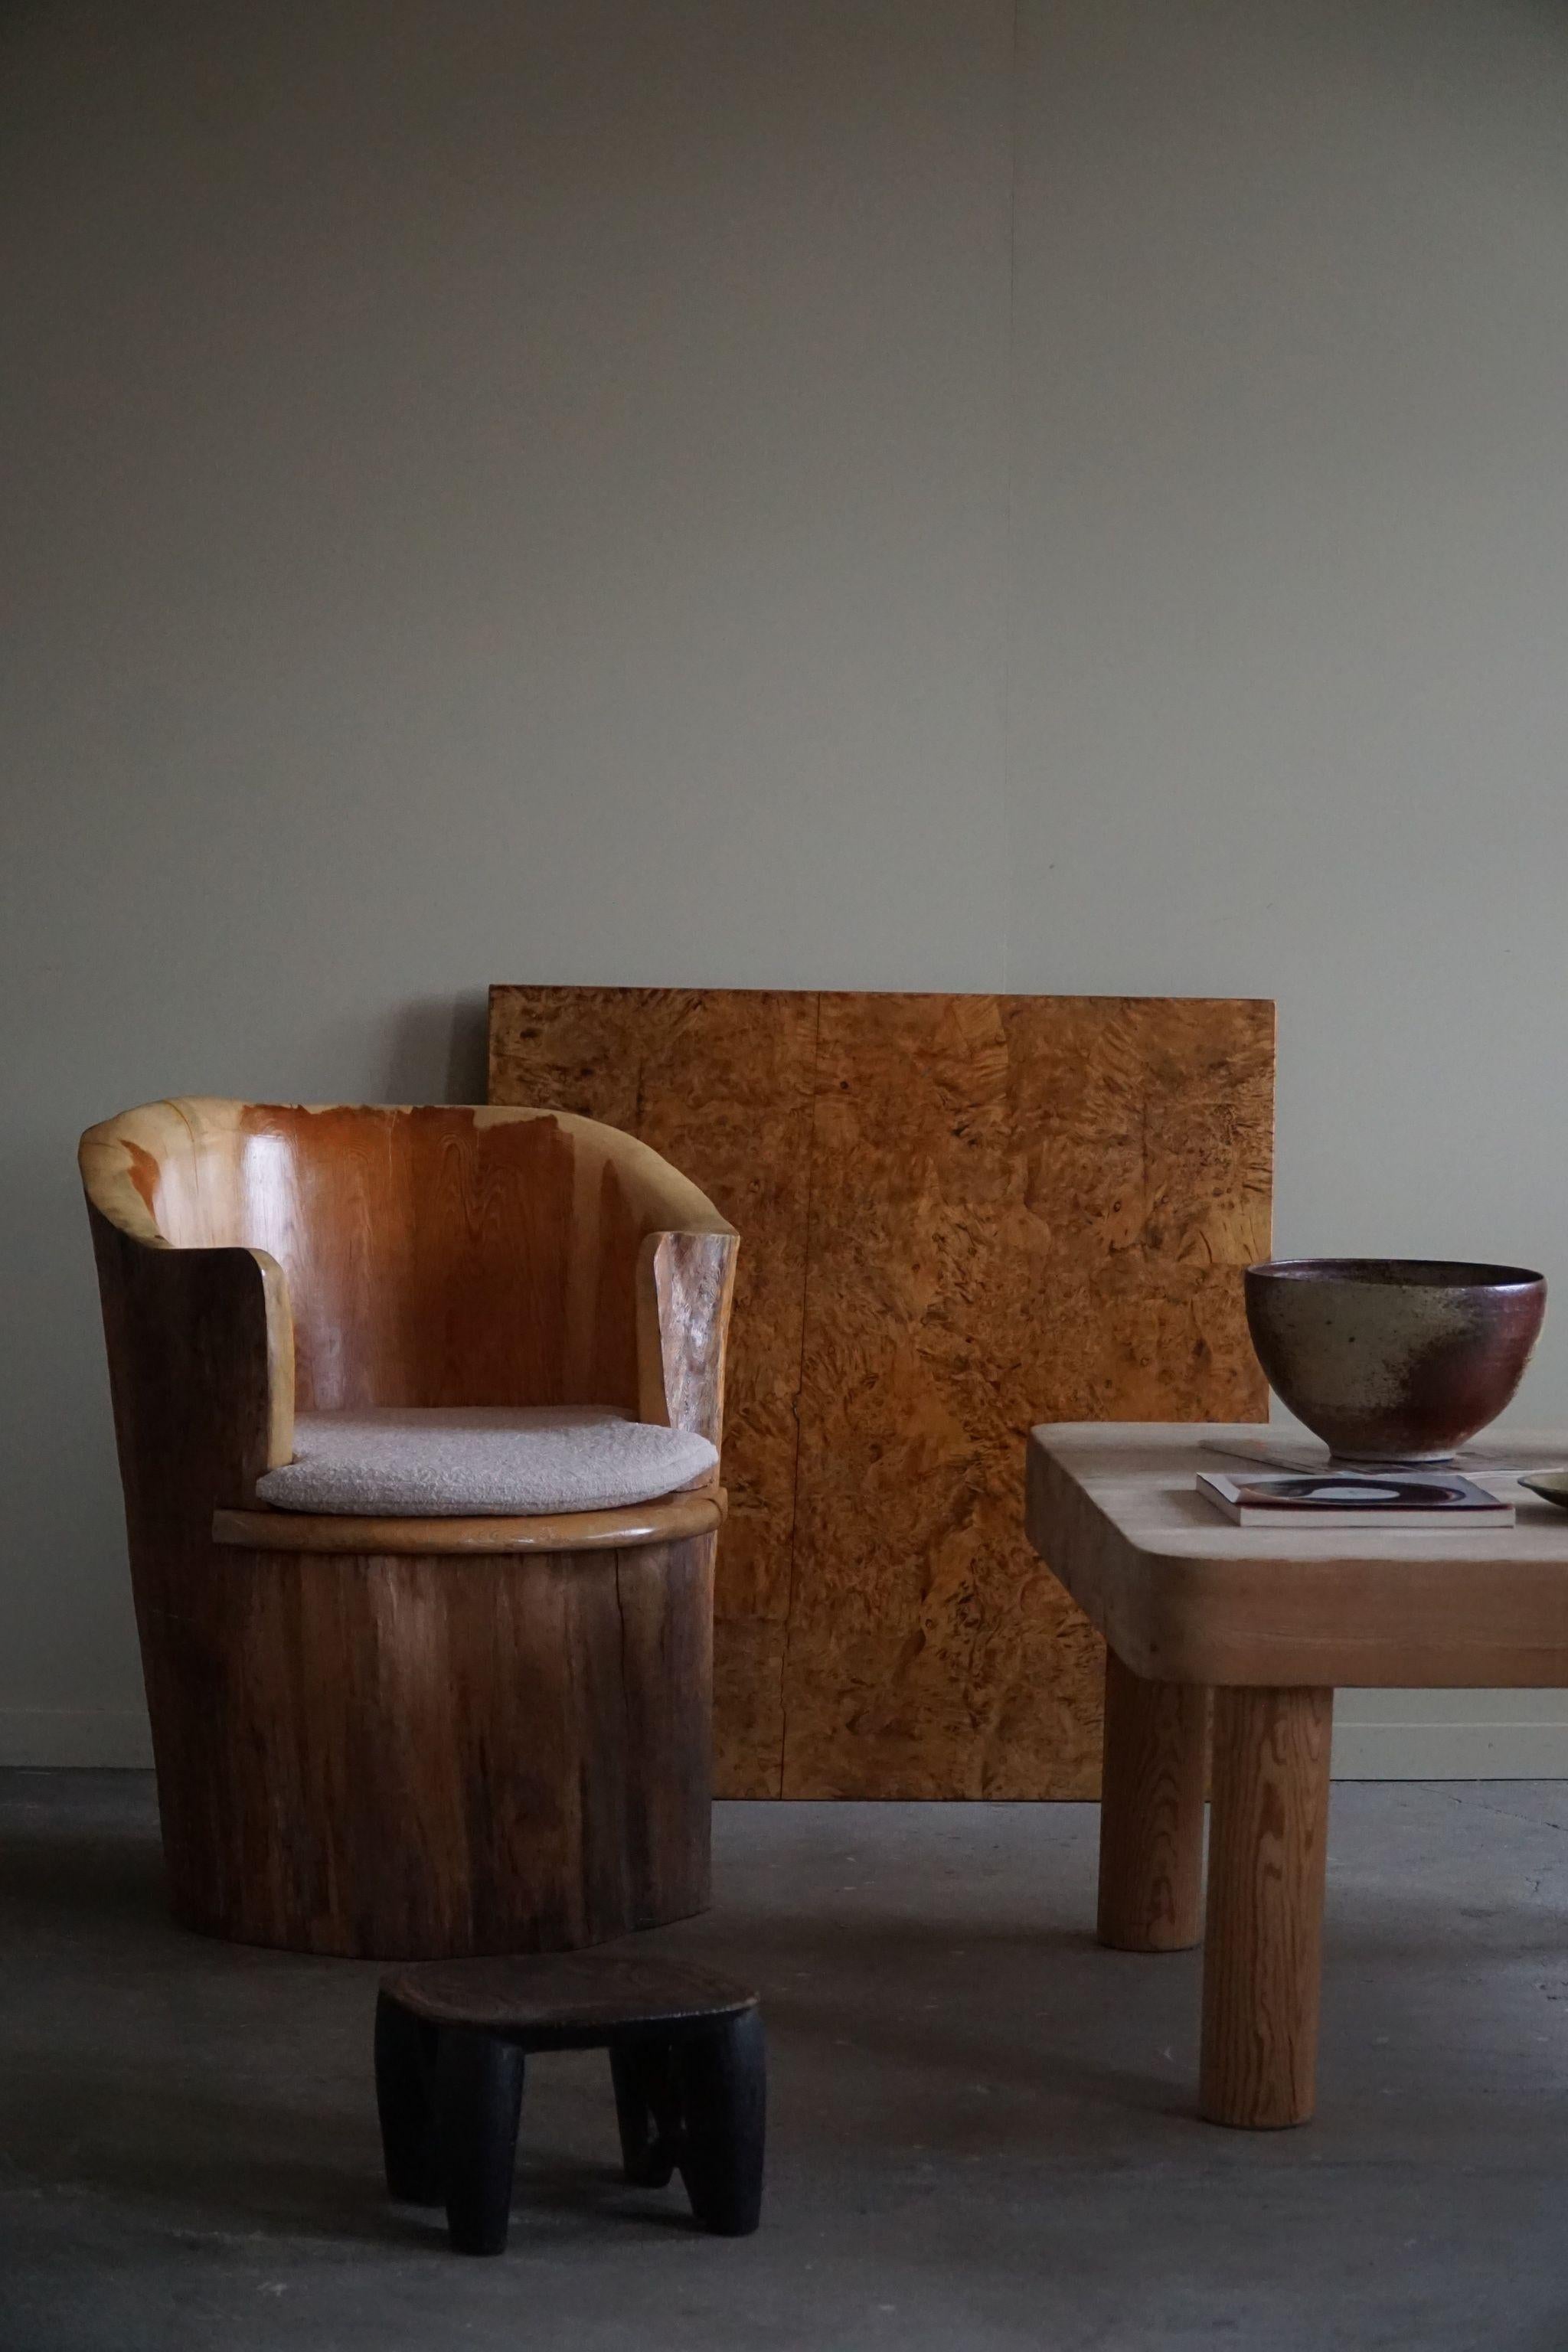 Sculptural rustic stump chair made in solid pine. Hand carved by Swedish cabinetmaker Göran Jalking. Stamped Nr. 33, okt 1968, Göran Jalking. Beautiful wood grains in this vintage piece. Seating in reupholstered bouclé, Tiree 1002 (Sand) from BUTE